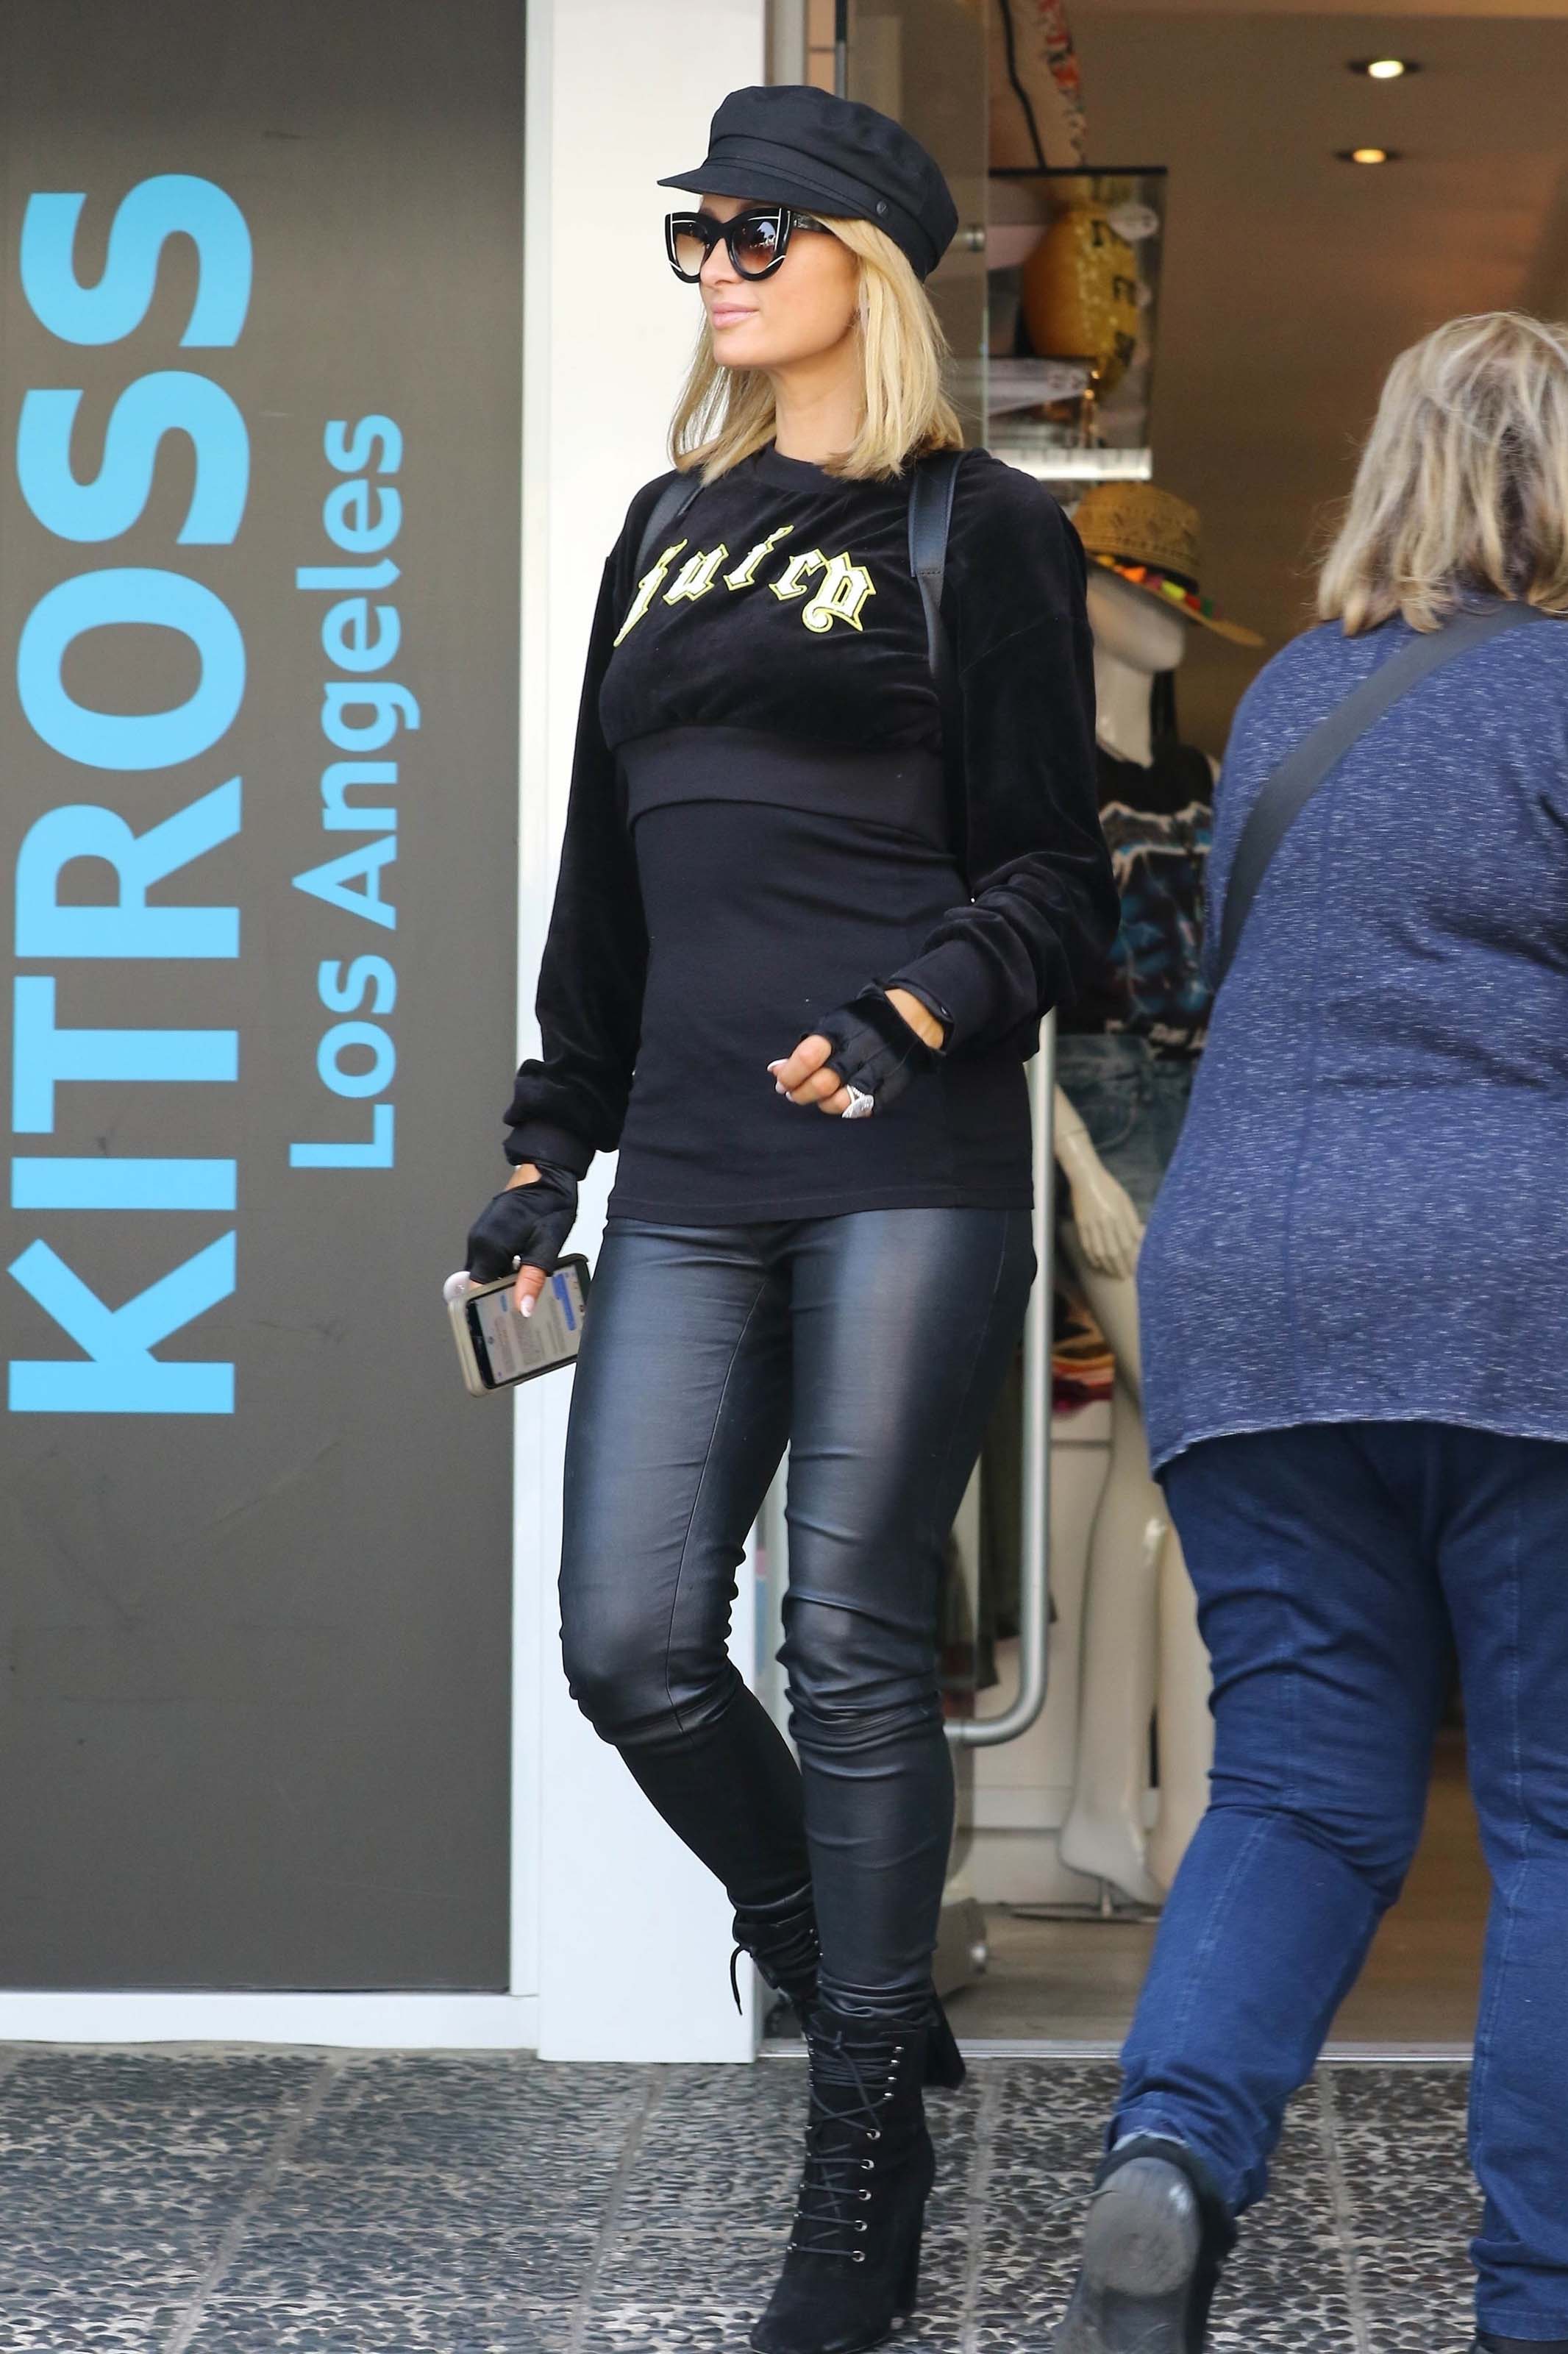 Paris Hilton shopping in West Hollywood